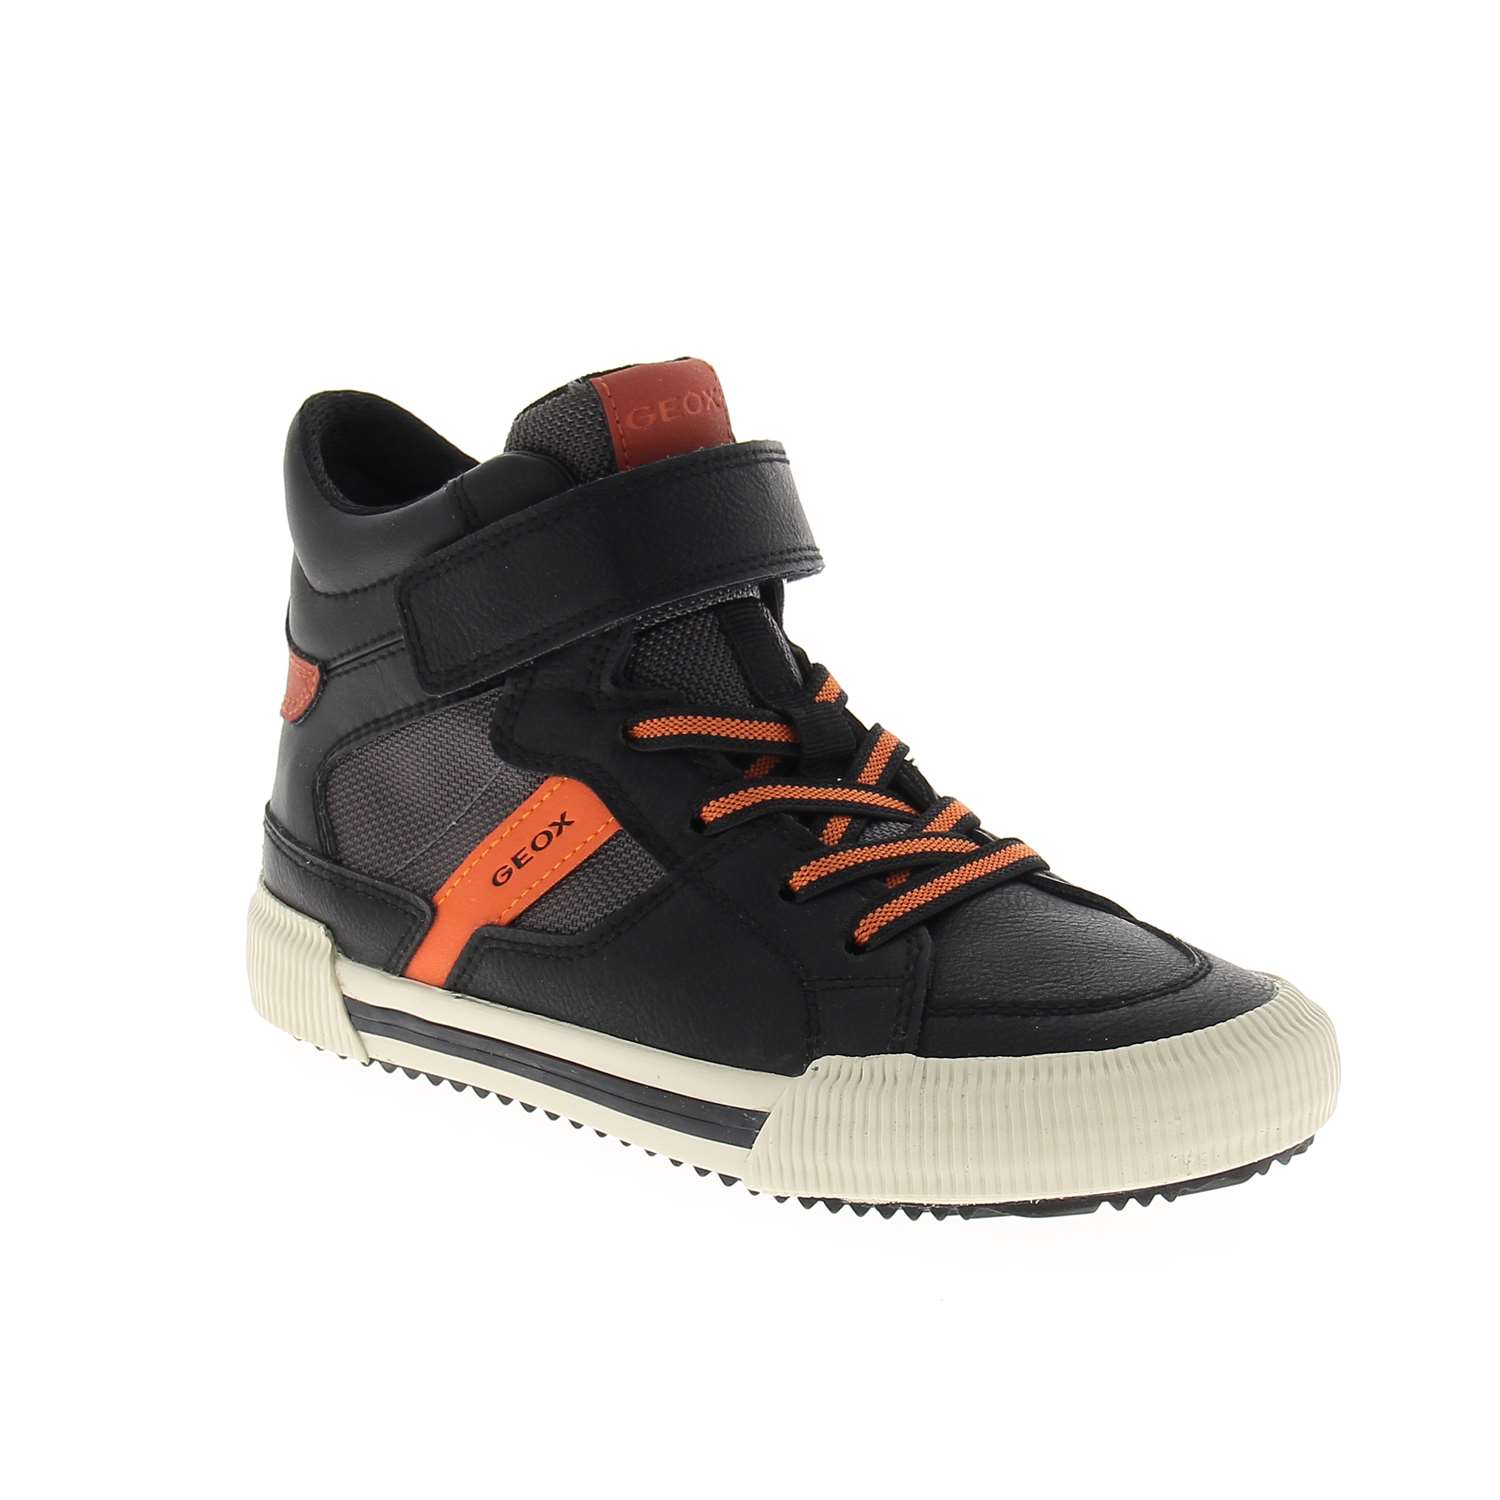 01 - ALONISSO EVO - GEOX - Chaussures montantes - Synthétique